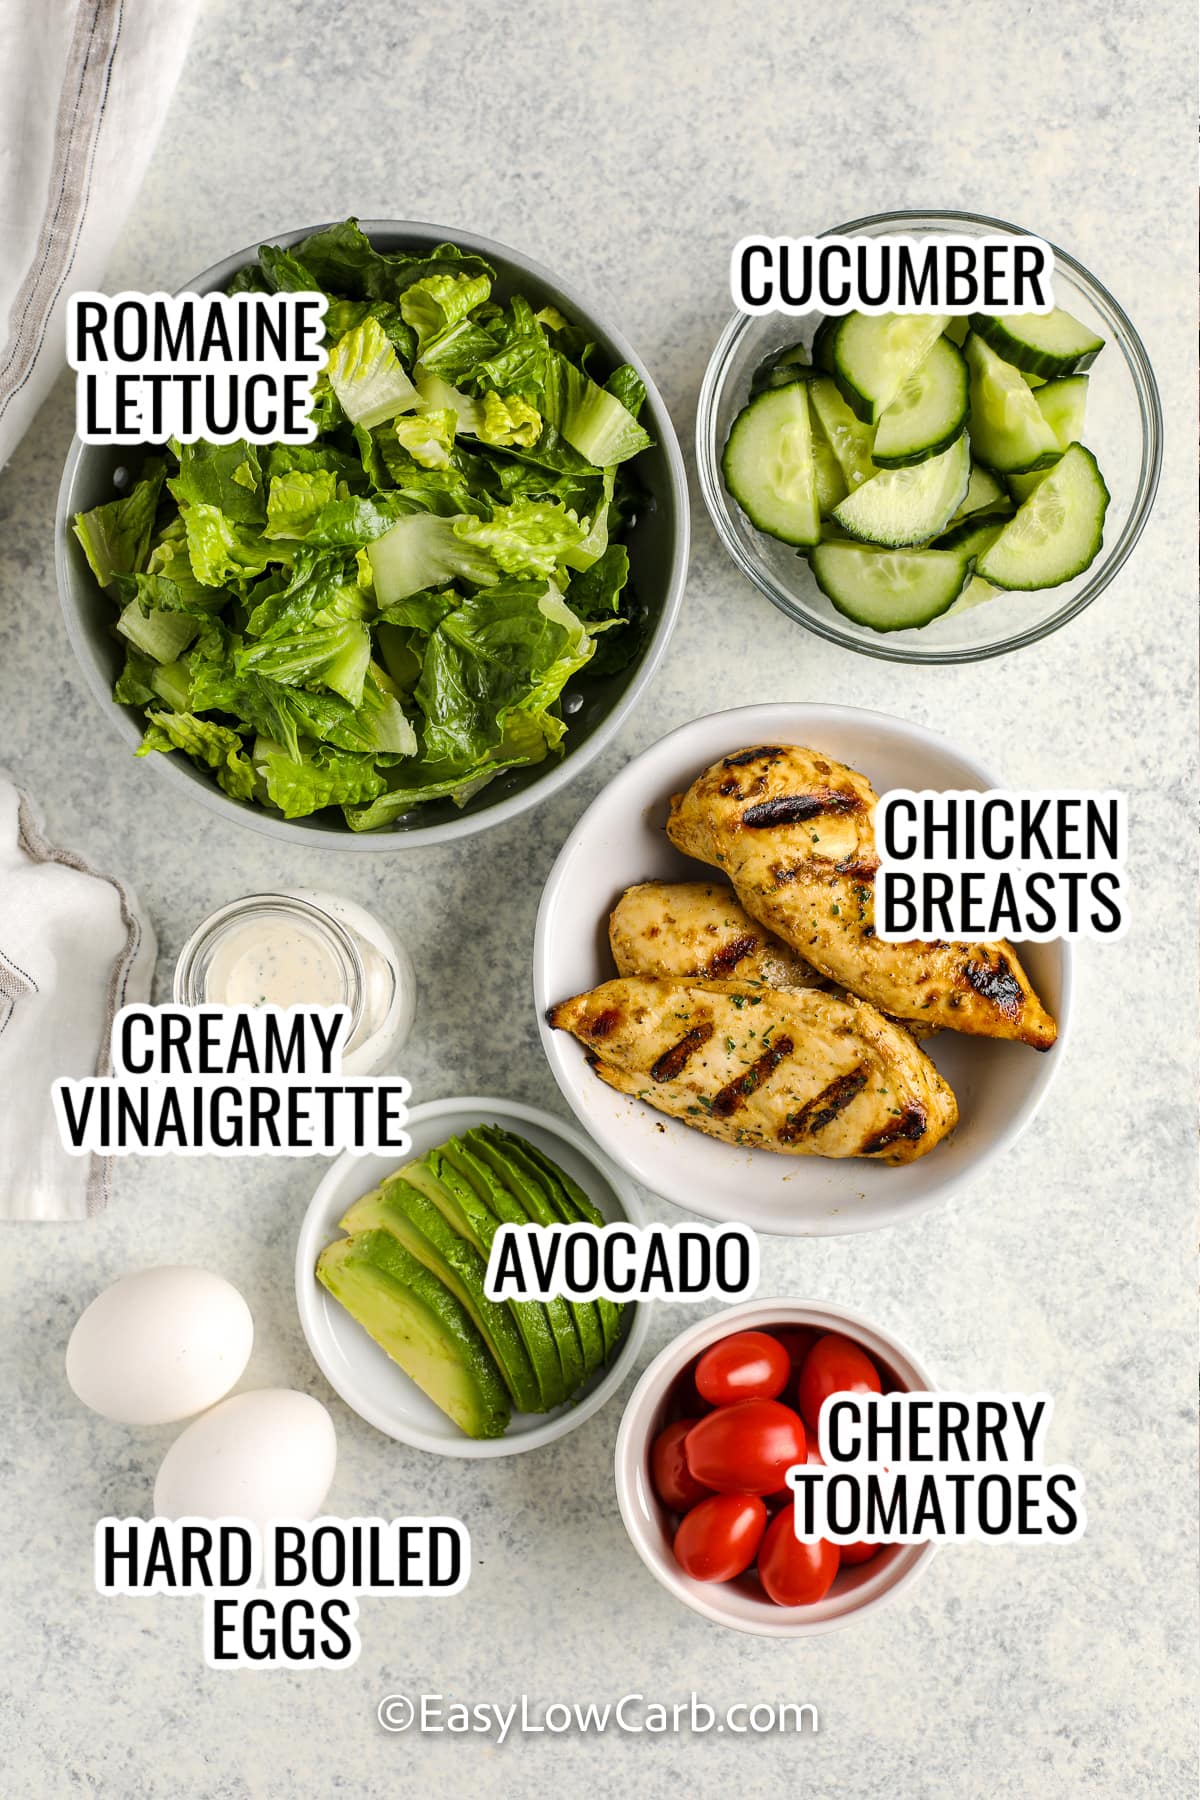 ingredients assembled to make grilled chicken salad, including romaine lettuce, cucumber, creamy vinaigrette, avocado, cherry tomatoes, chicken breasts, and hard boiled eggs